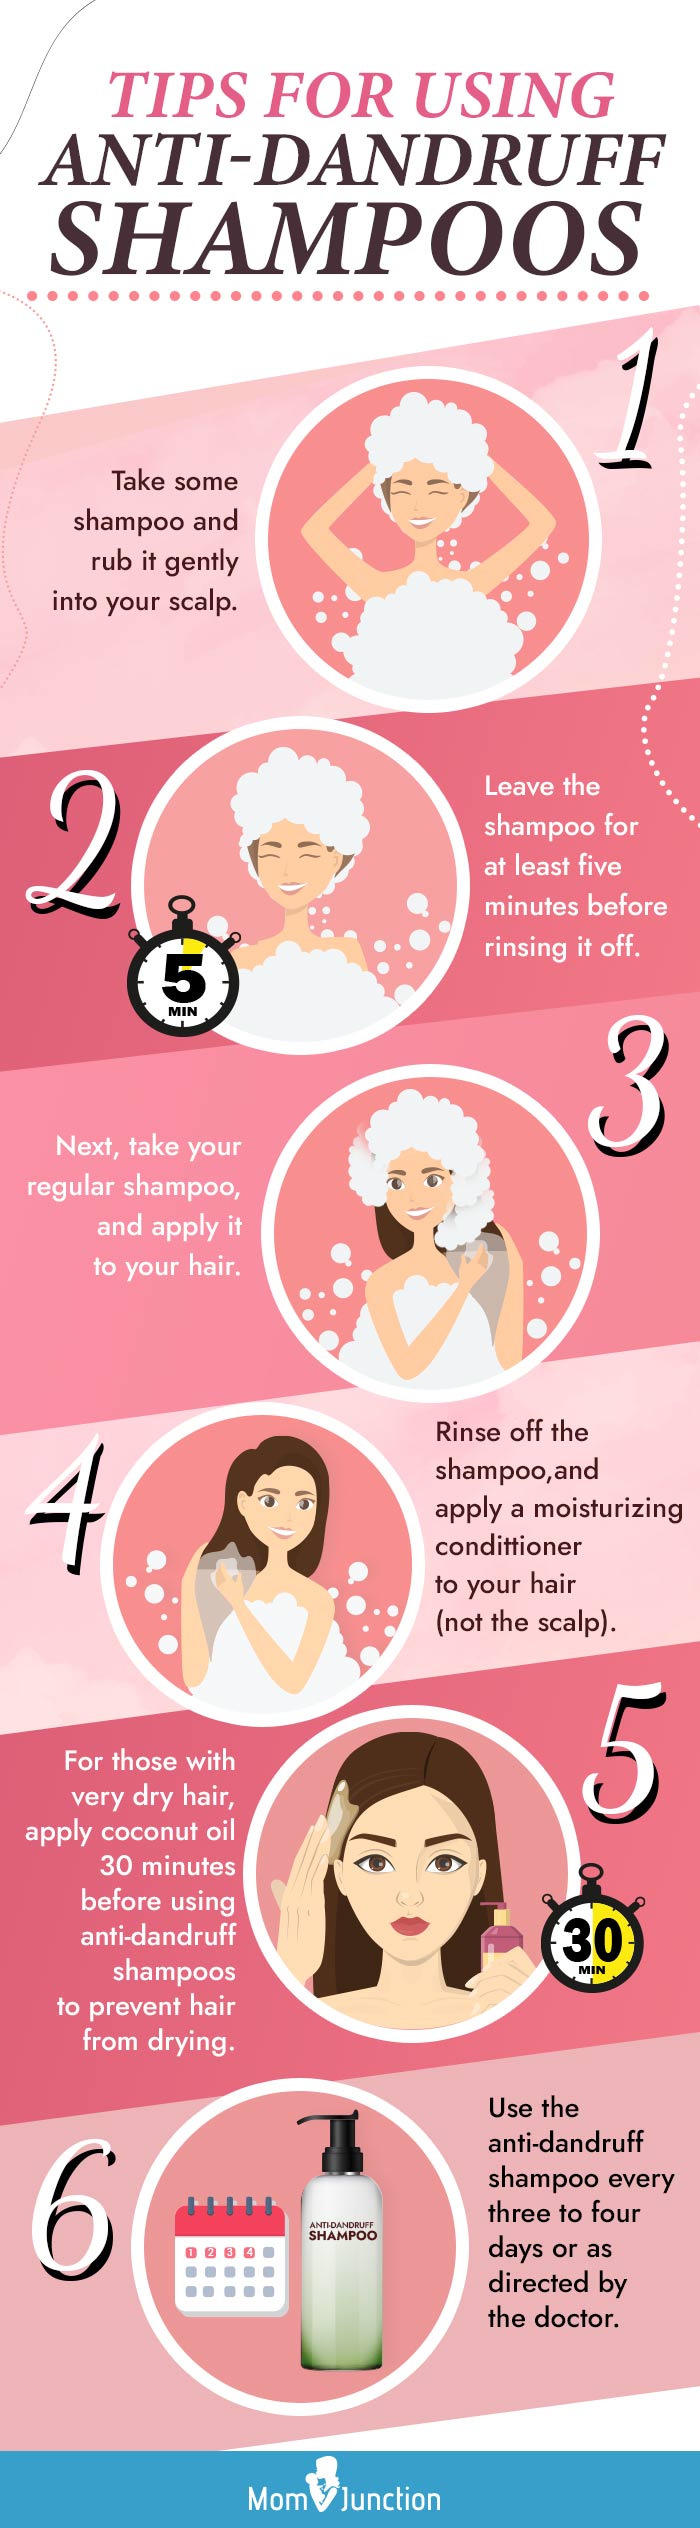 Infographic: How To Use Anti-Dandruff Shampoos